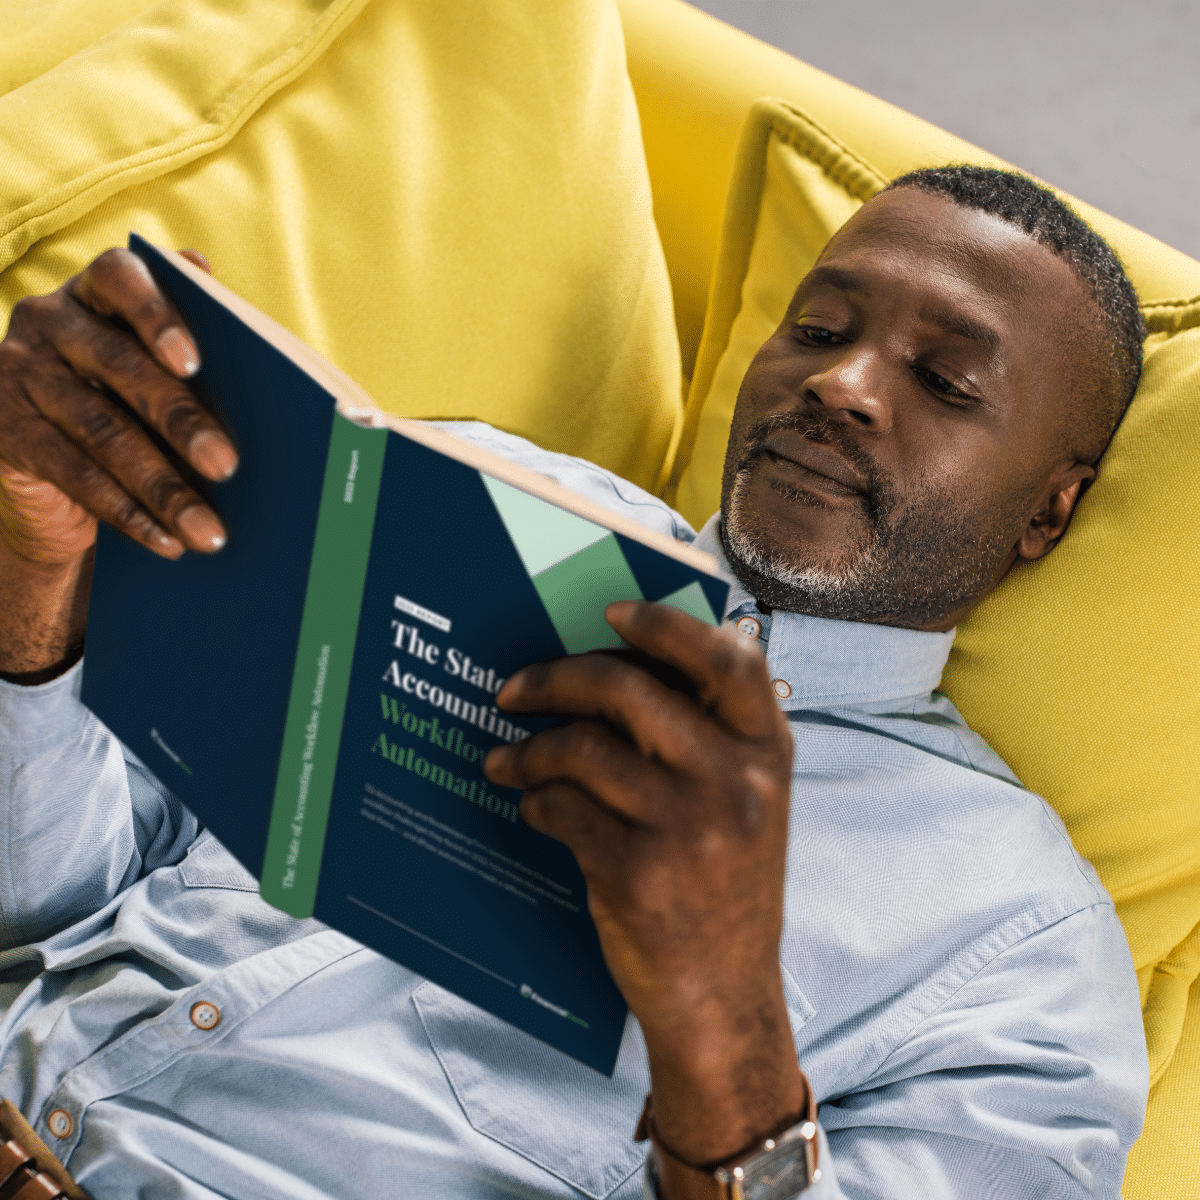 Man reading The State of Accounting Workflow Automation Report